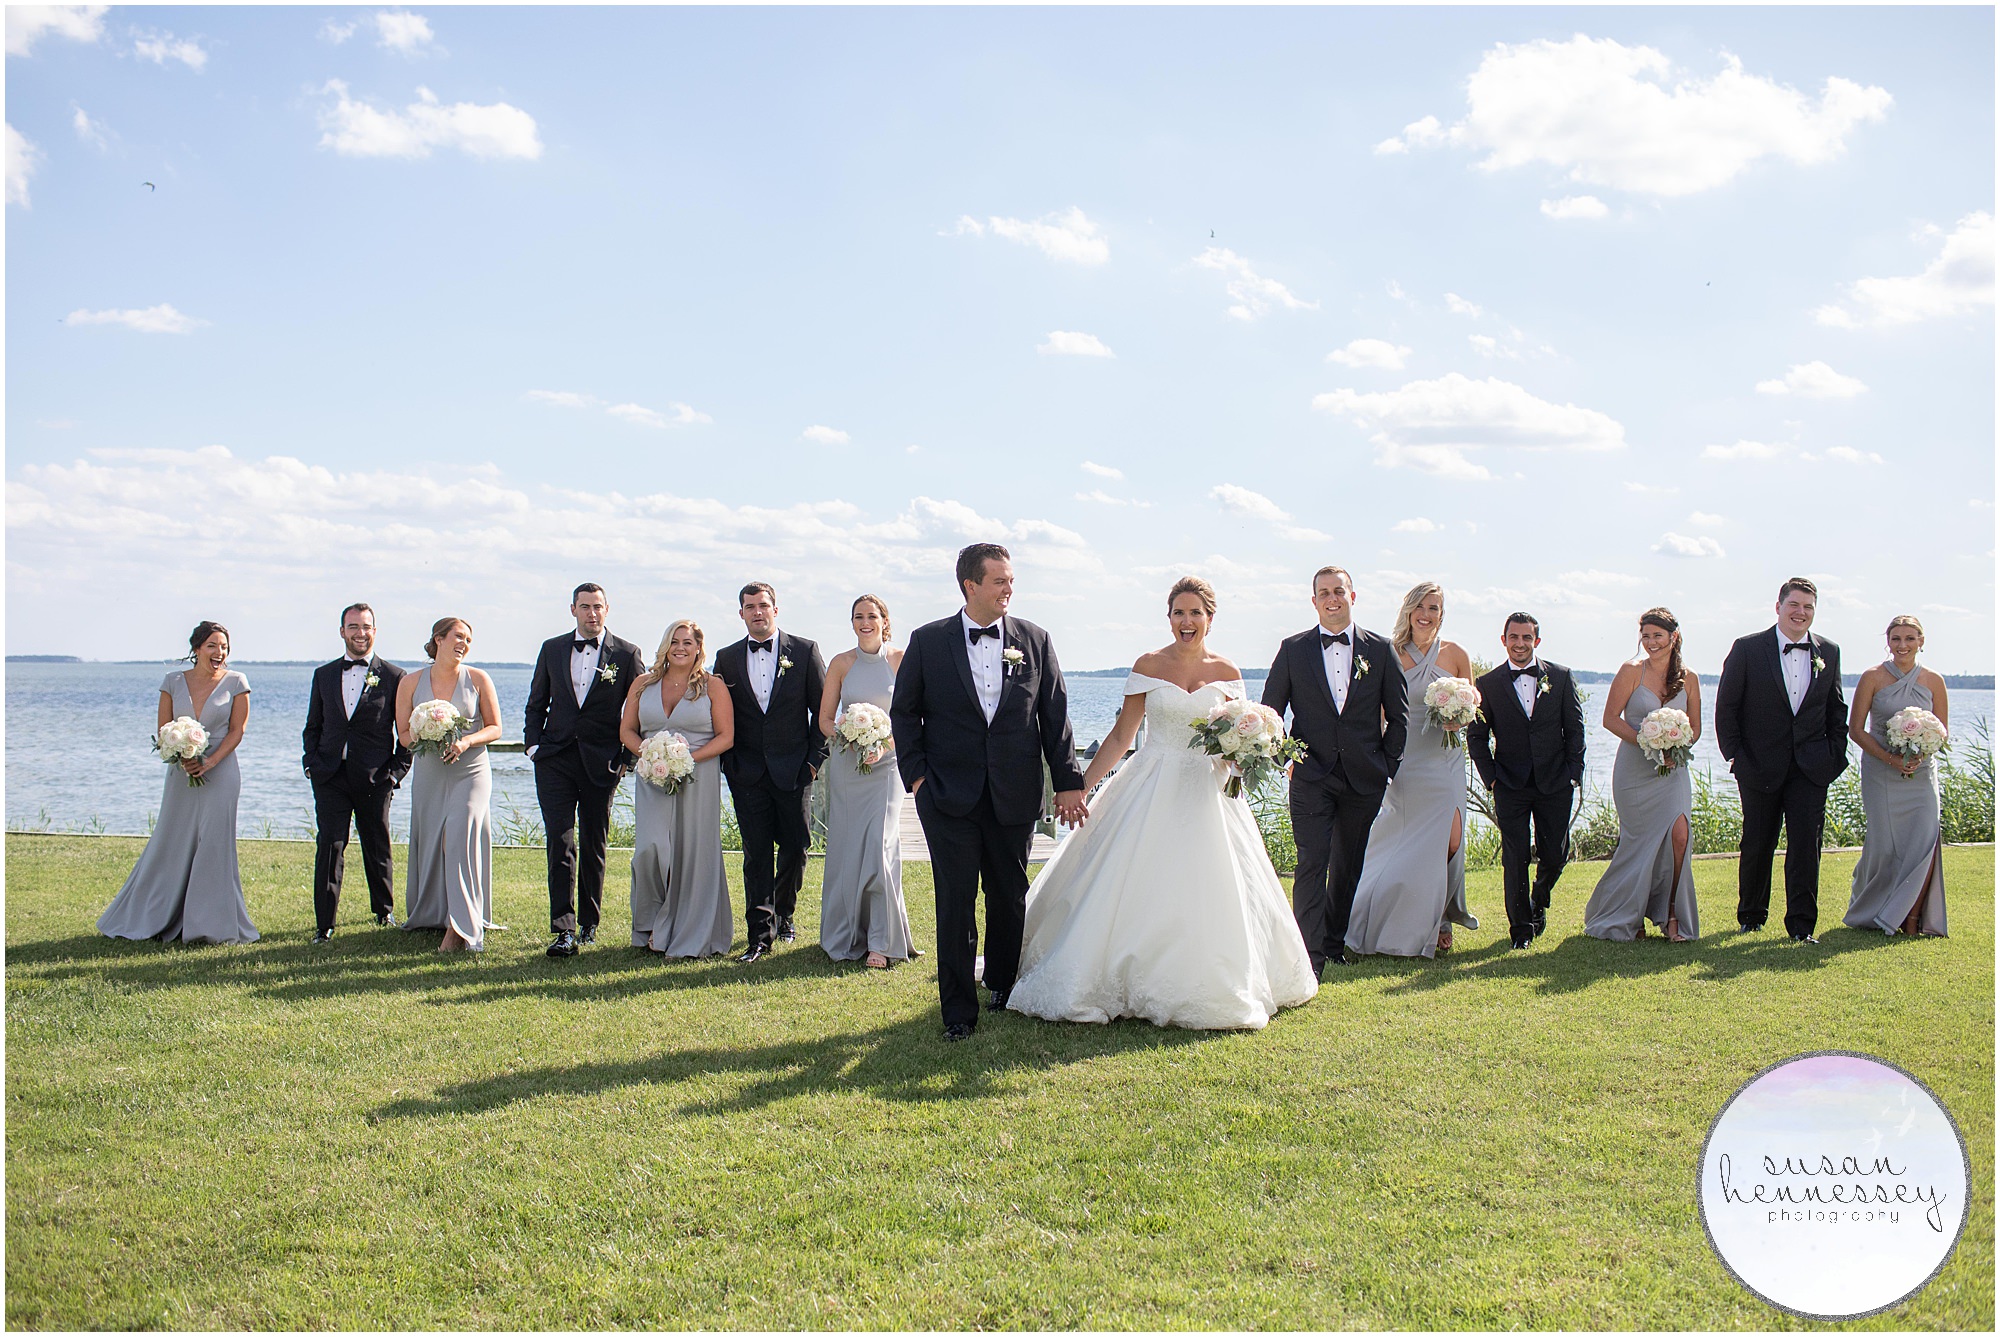 The bridal party walks across the lawn at Rehoboth Beach Country Club wedding